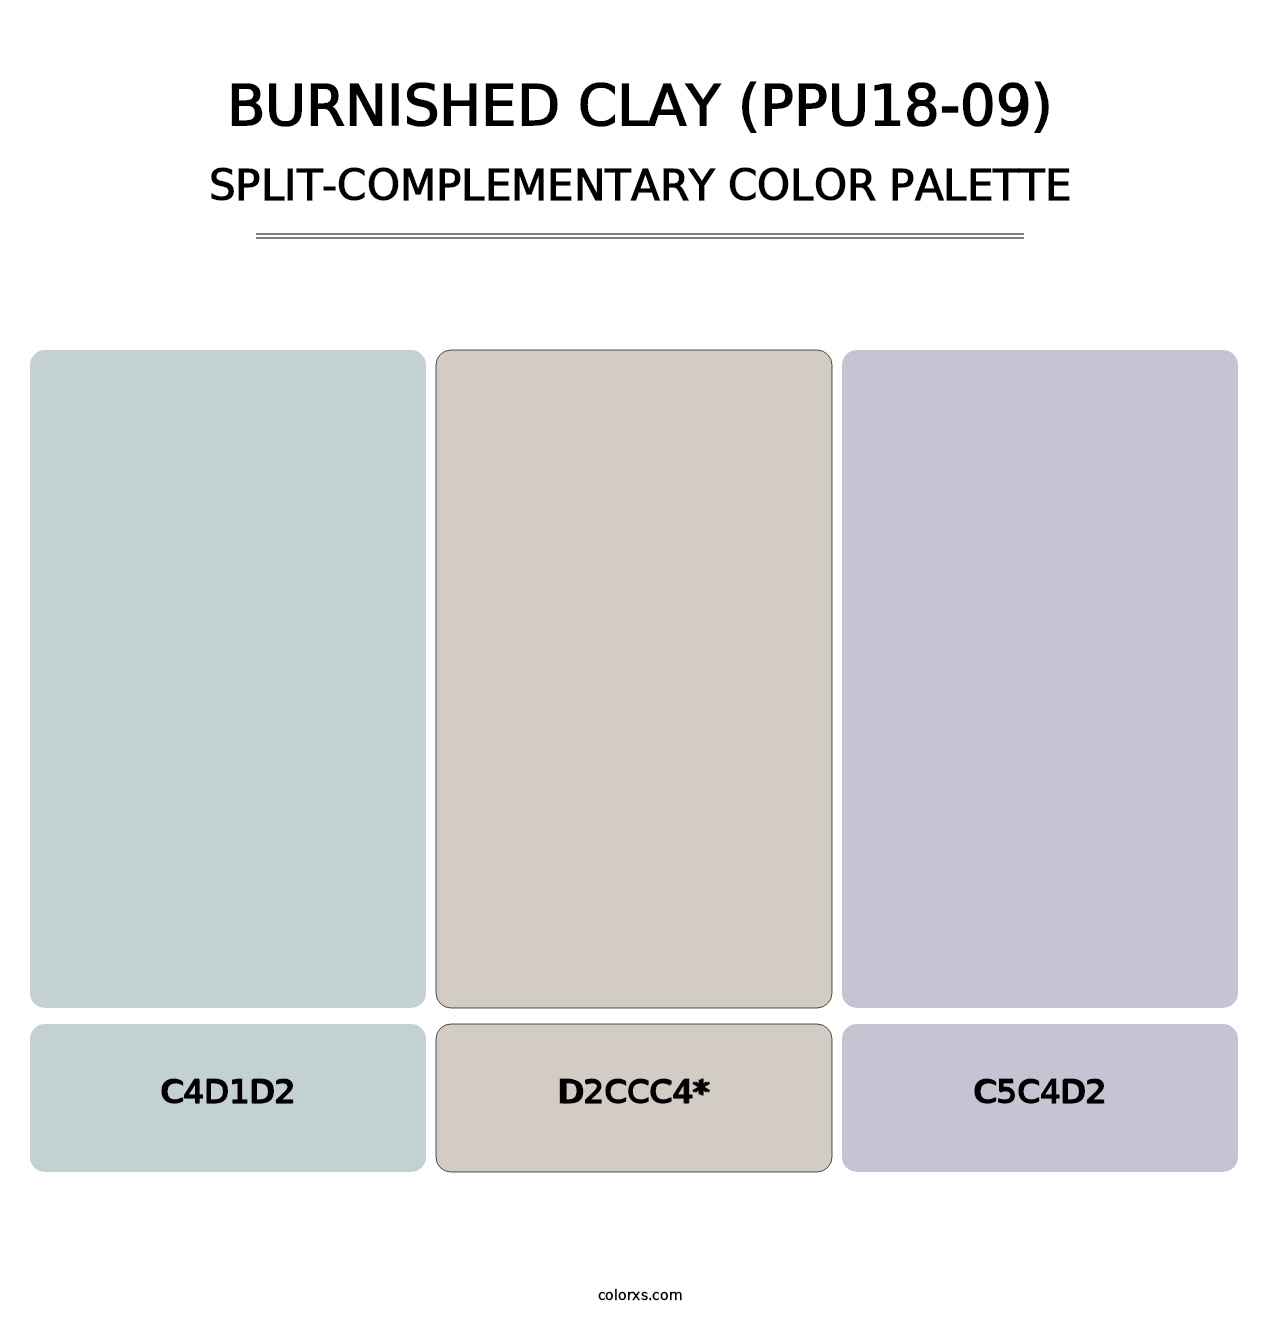 Burnished Clay (PPU18-09) - Split-Complementary Color Palette